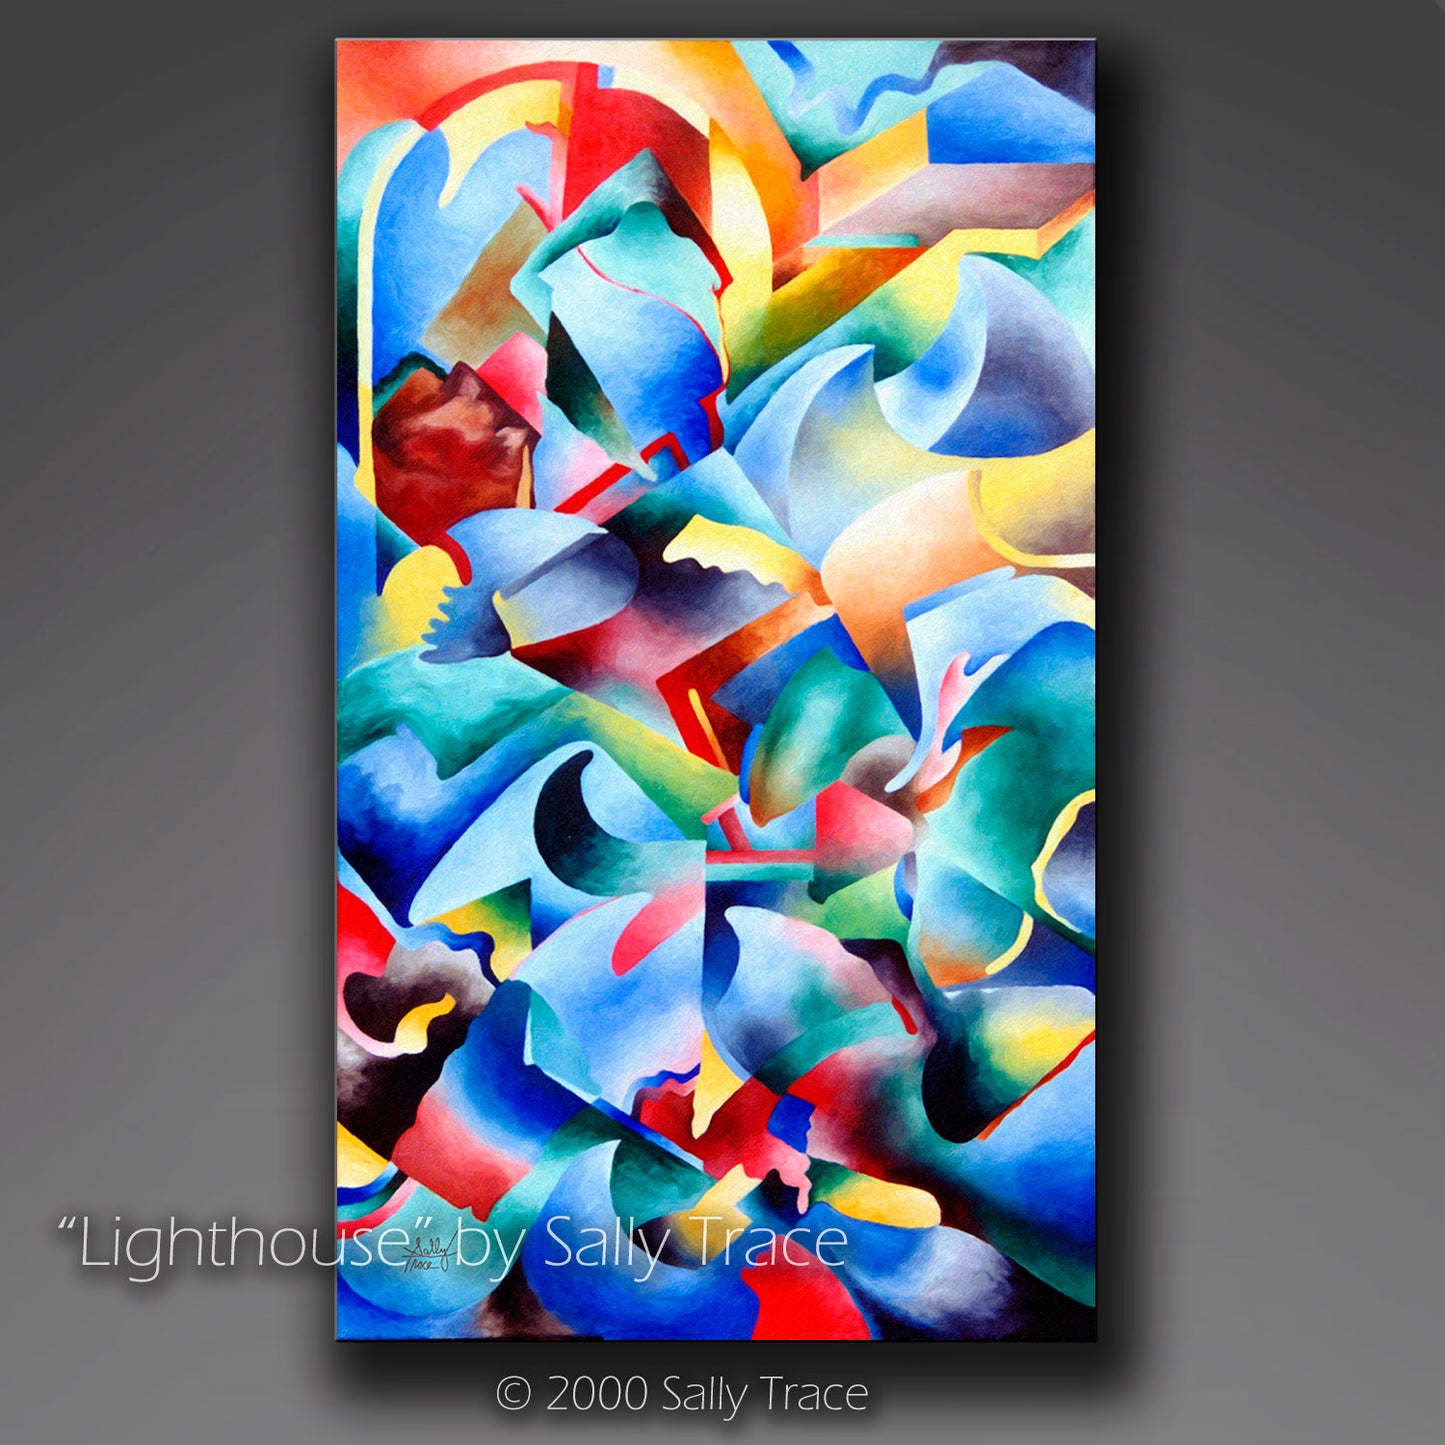 Abstract modern art painting of a lighthouse with lots of geometric shapes, wave shapes, blue colors and suggestions of movement. By Sally Trace